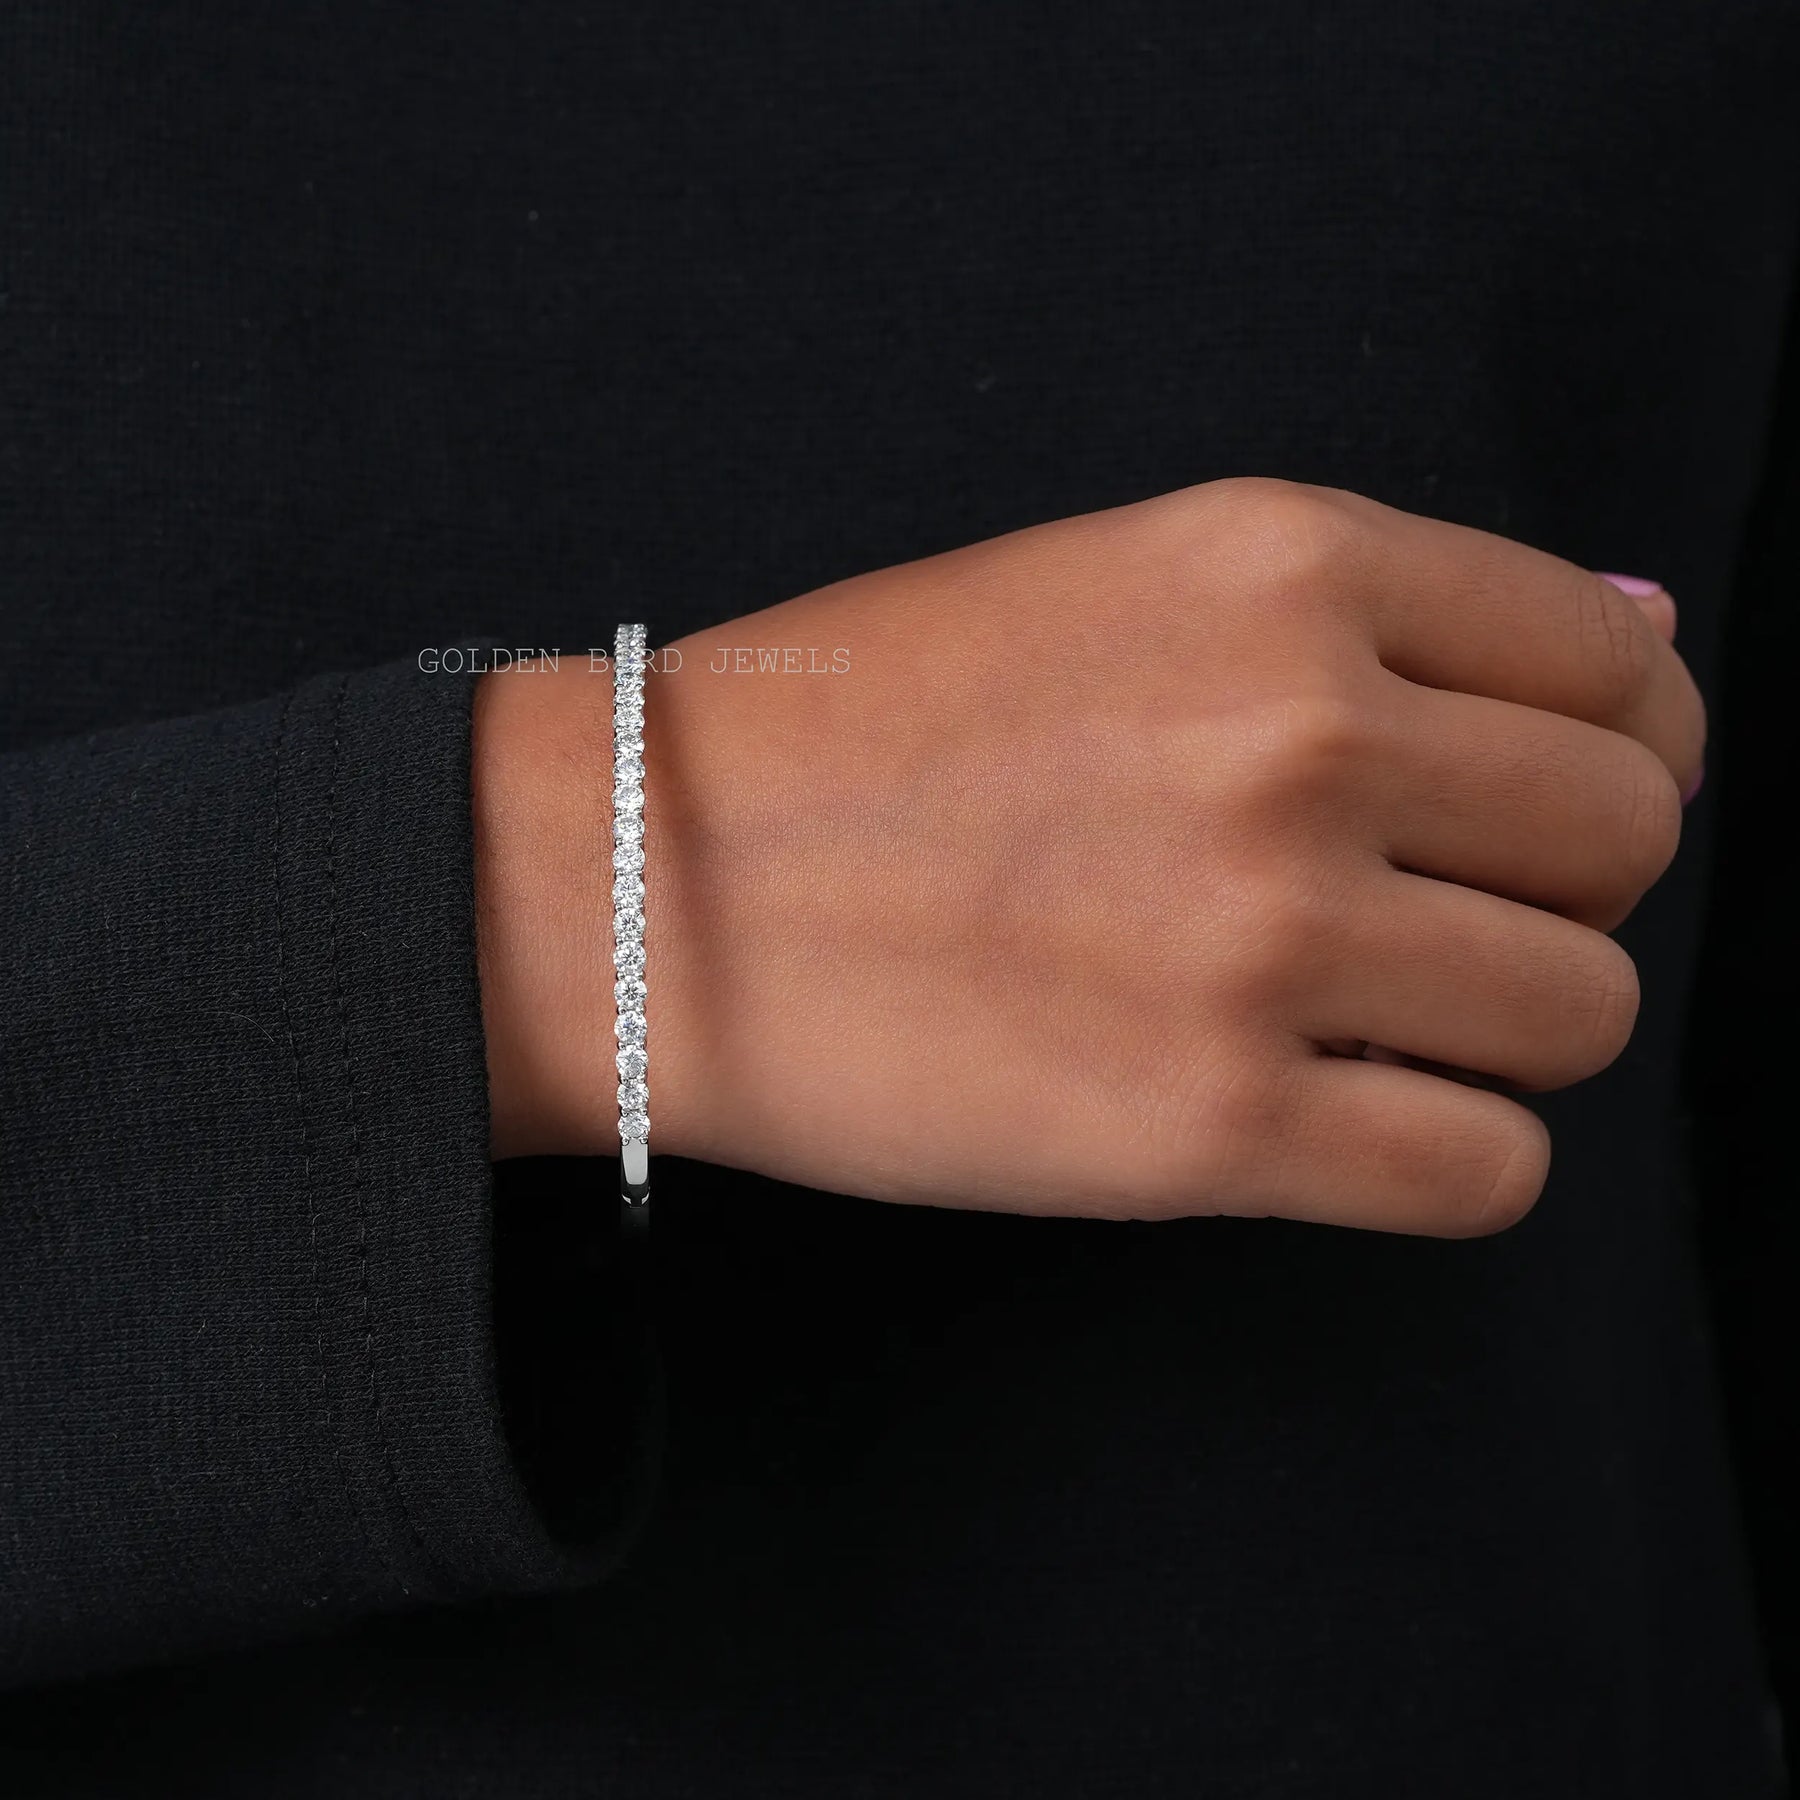 [On hand front view of round cut white gold bracelet]-[Golden Bird Jewels]